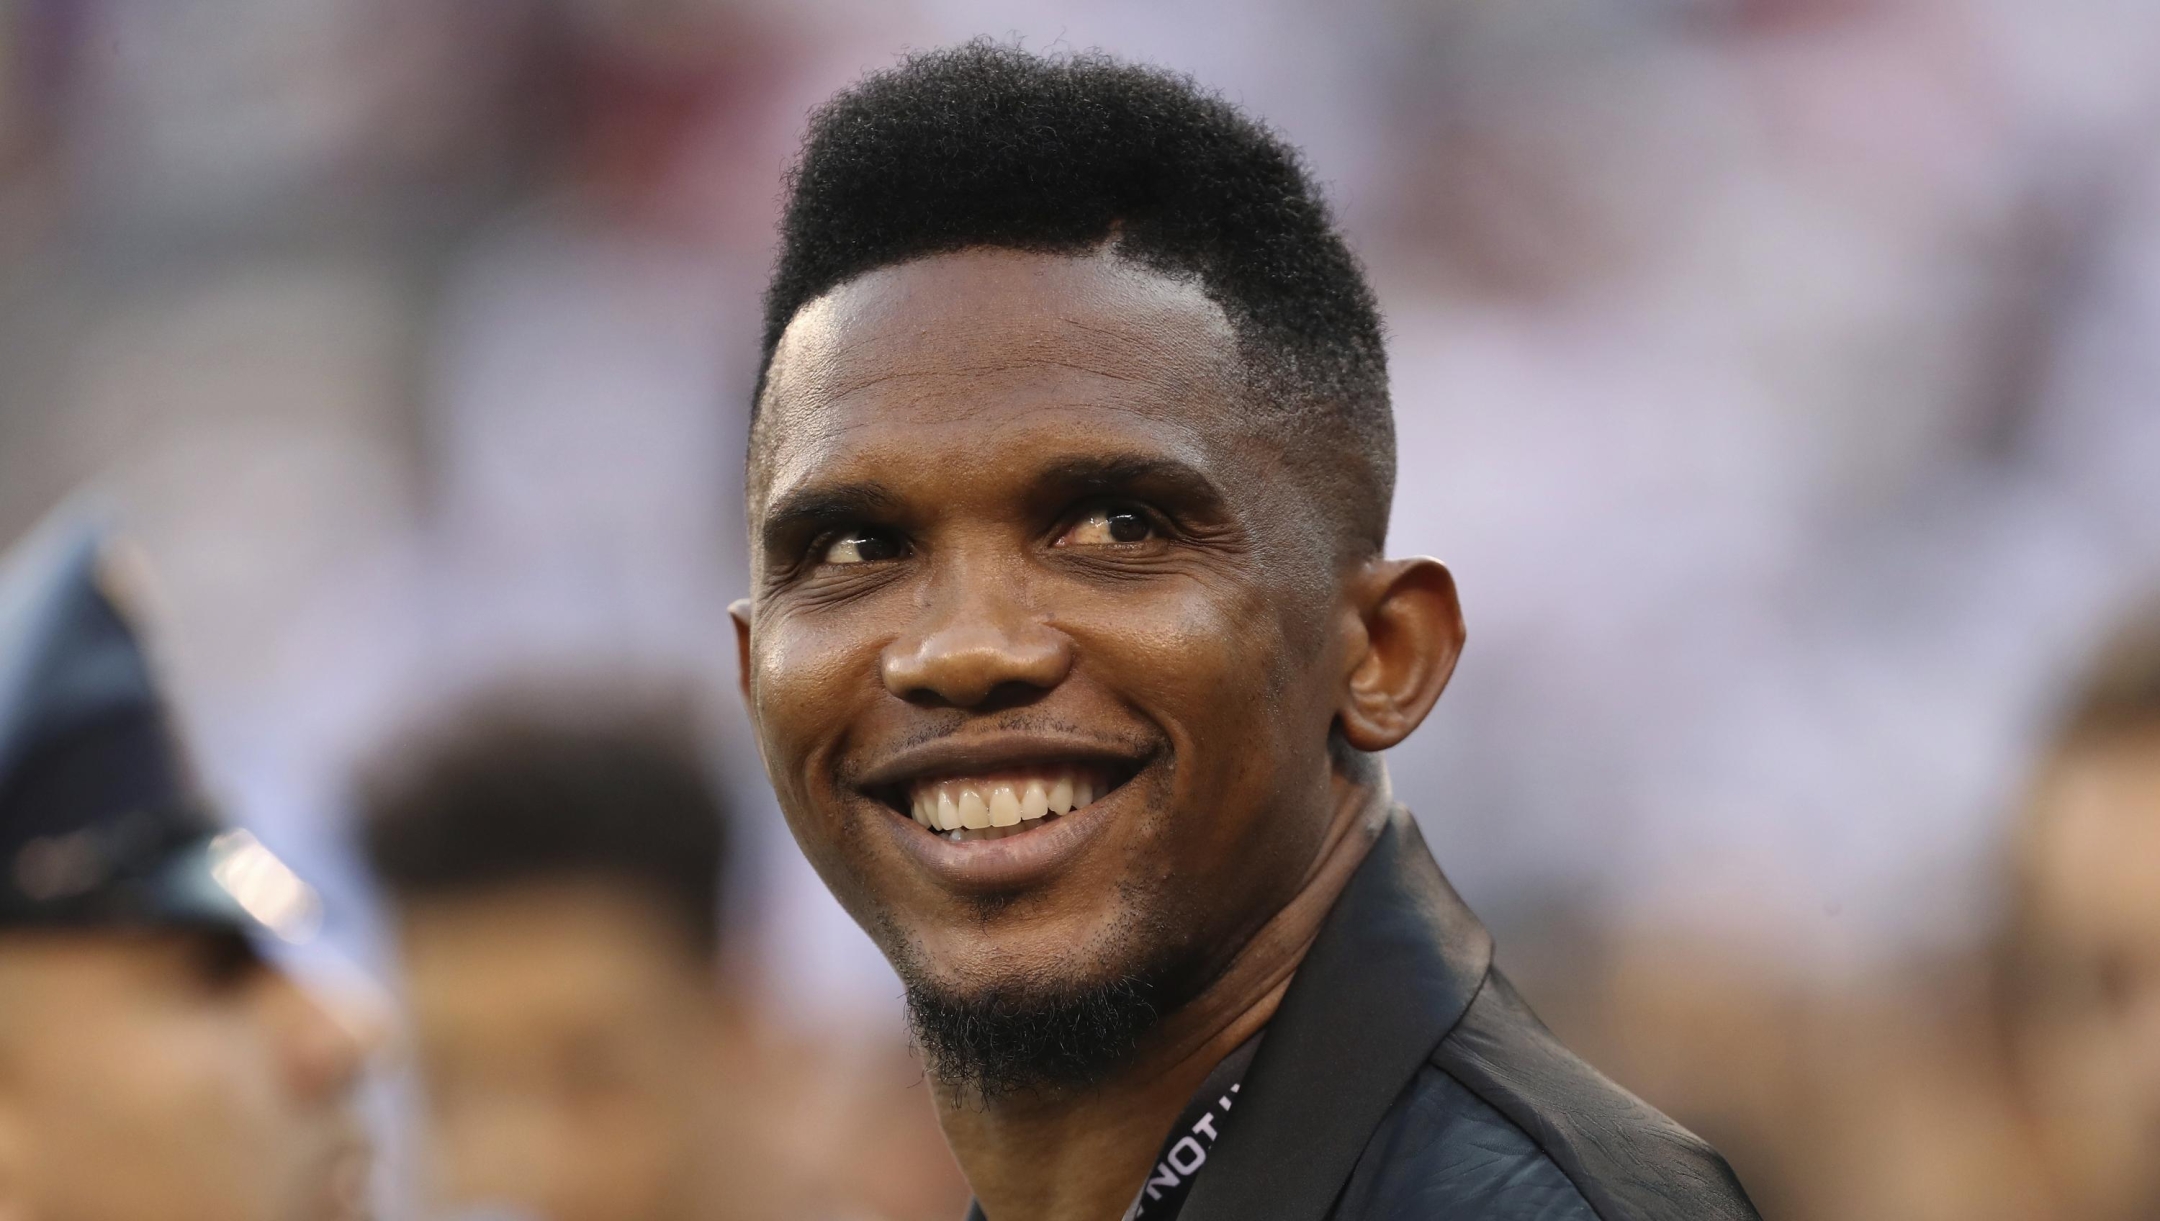 FILE - Soccer player Samuel Eto'o watches warmups before an International Champions Cup soccer match between Atletico Madrid and Real Madrid, July 26, 2019, in East Rutherford, N.J. Eto?o, president of the Cameroon soccer federation, is being investigated by the Confederation of African Football for alleged ?improper conduct." The former Barcelona and Inter Milan forward was elected to a four-year term in December 2021 but the initial euphoria that greeted his reforms is giving way to accusations of clientelism and unfulfilled financial promises to clubs. (AP Photo/Steve Luciano, File)